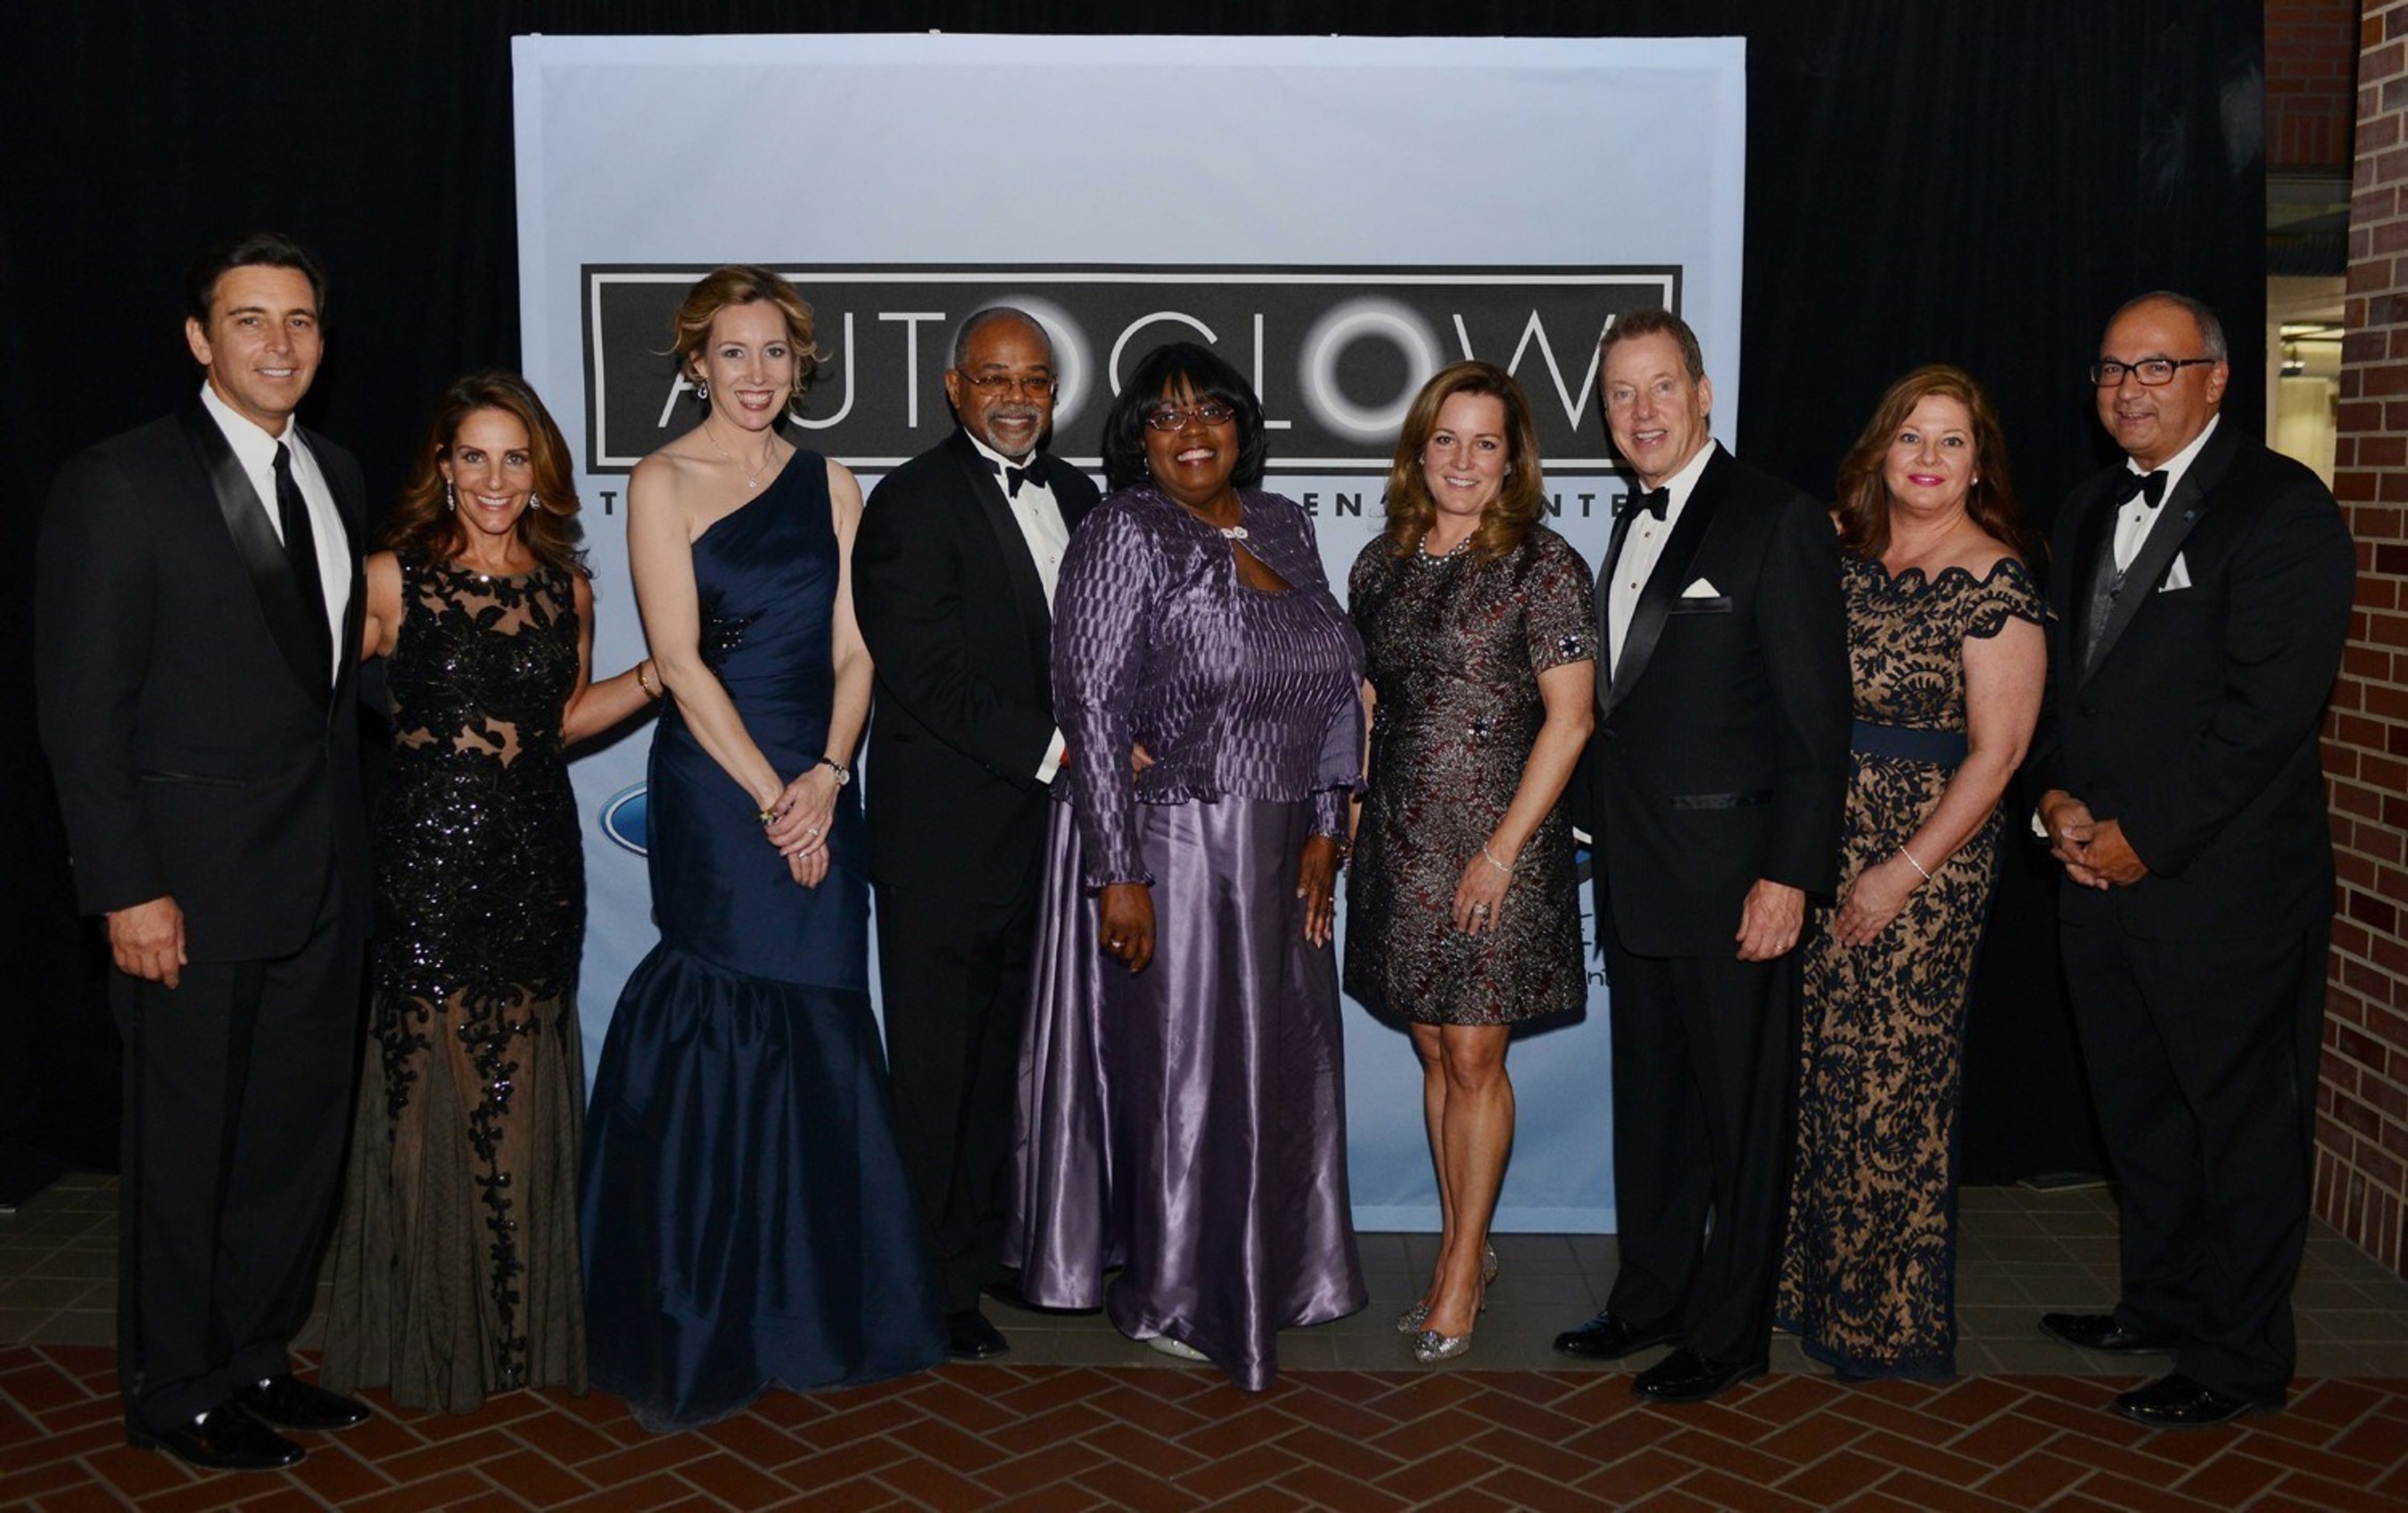 Mark and Jane Fields, President and CEO, Ford Motor Company, Renee Godfrey, Corporate Alliances Manager, Ford Motor Company; Danny Matthews, Debora Matthews, CEO, The Children's Center; Lisa Ford, Bill Ford, Executive Chairman, Ford Motor Company; Tammy Zonker, Chief  Philanthropy Officer, The Children's Cent...